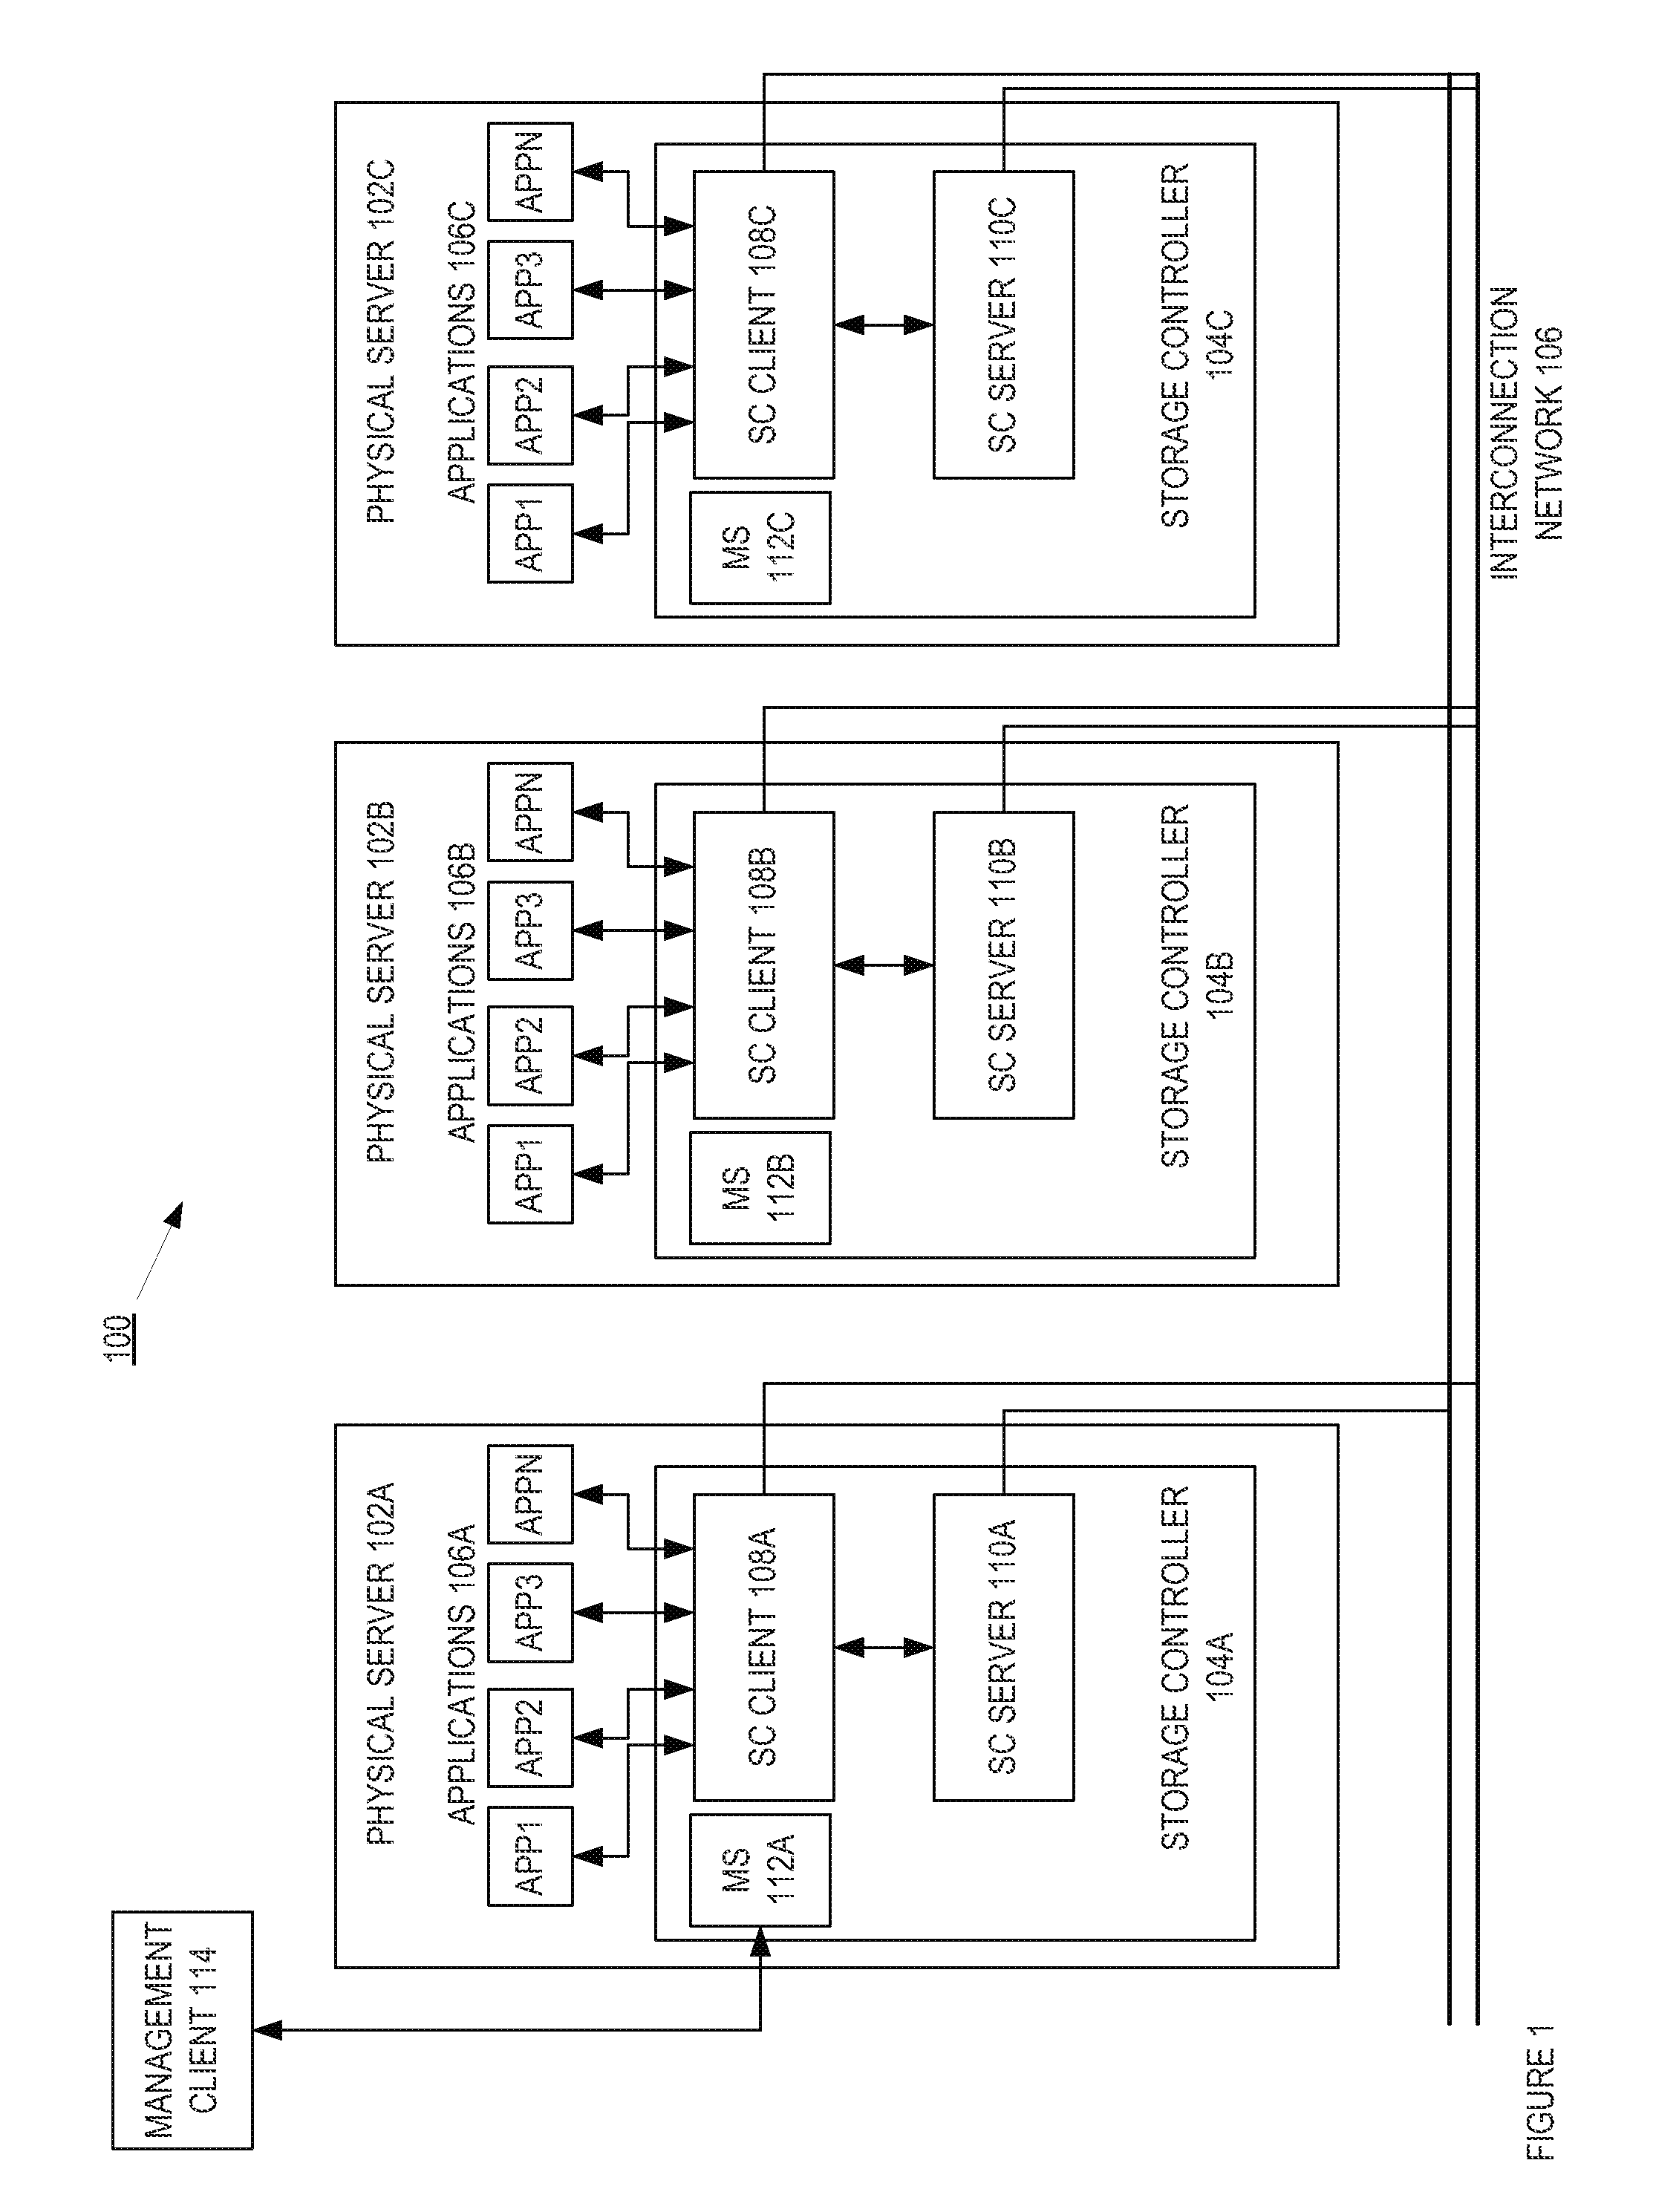 Systems and methods for implementing an enterprise-class converged compute-network-storage appliance